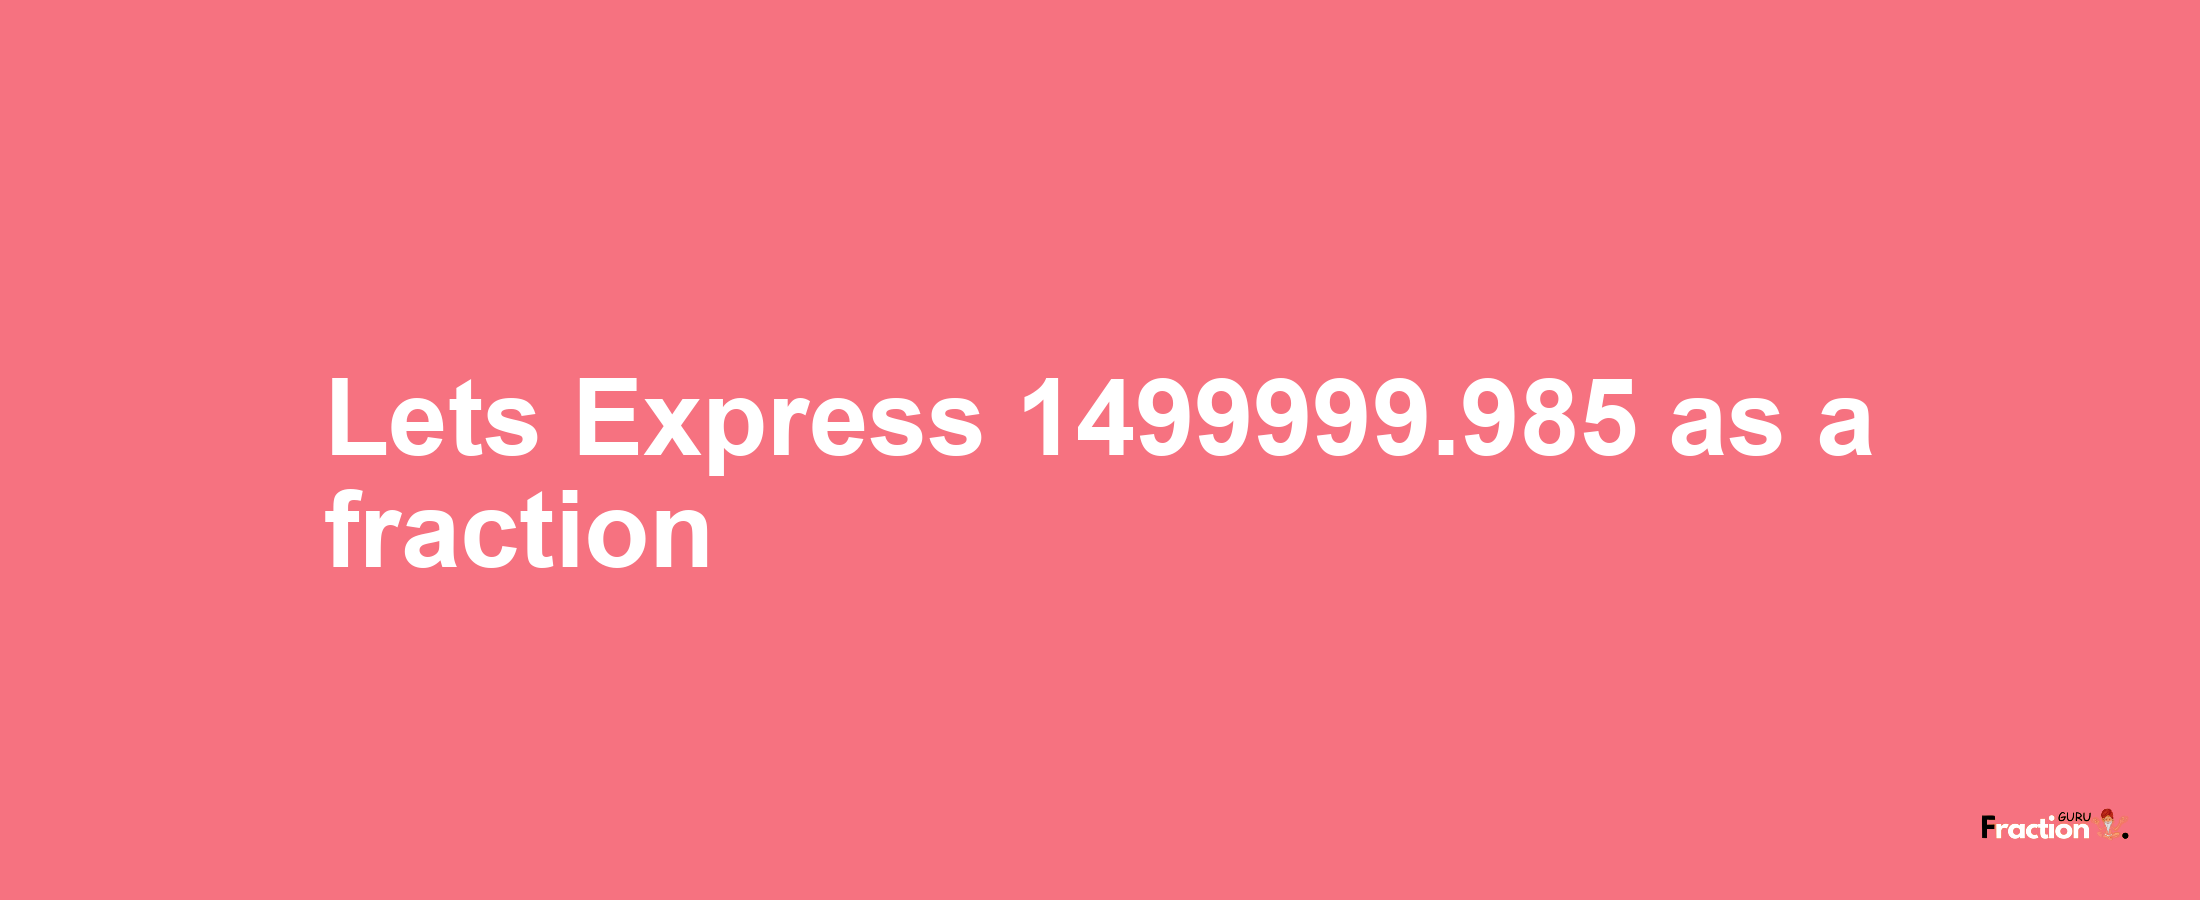 Lets Express 1499999.985 as afraction